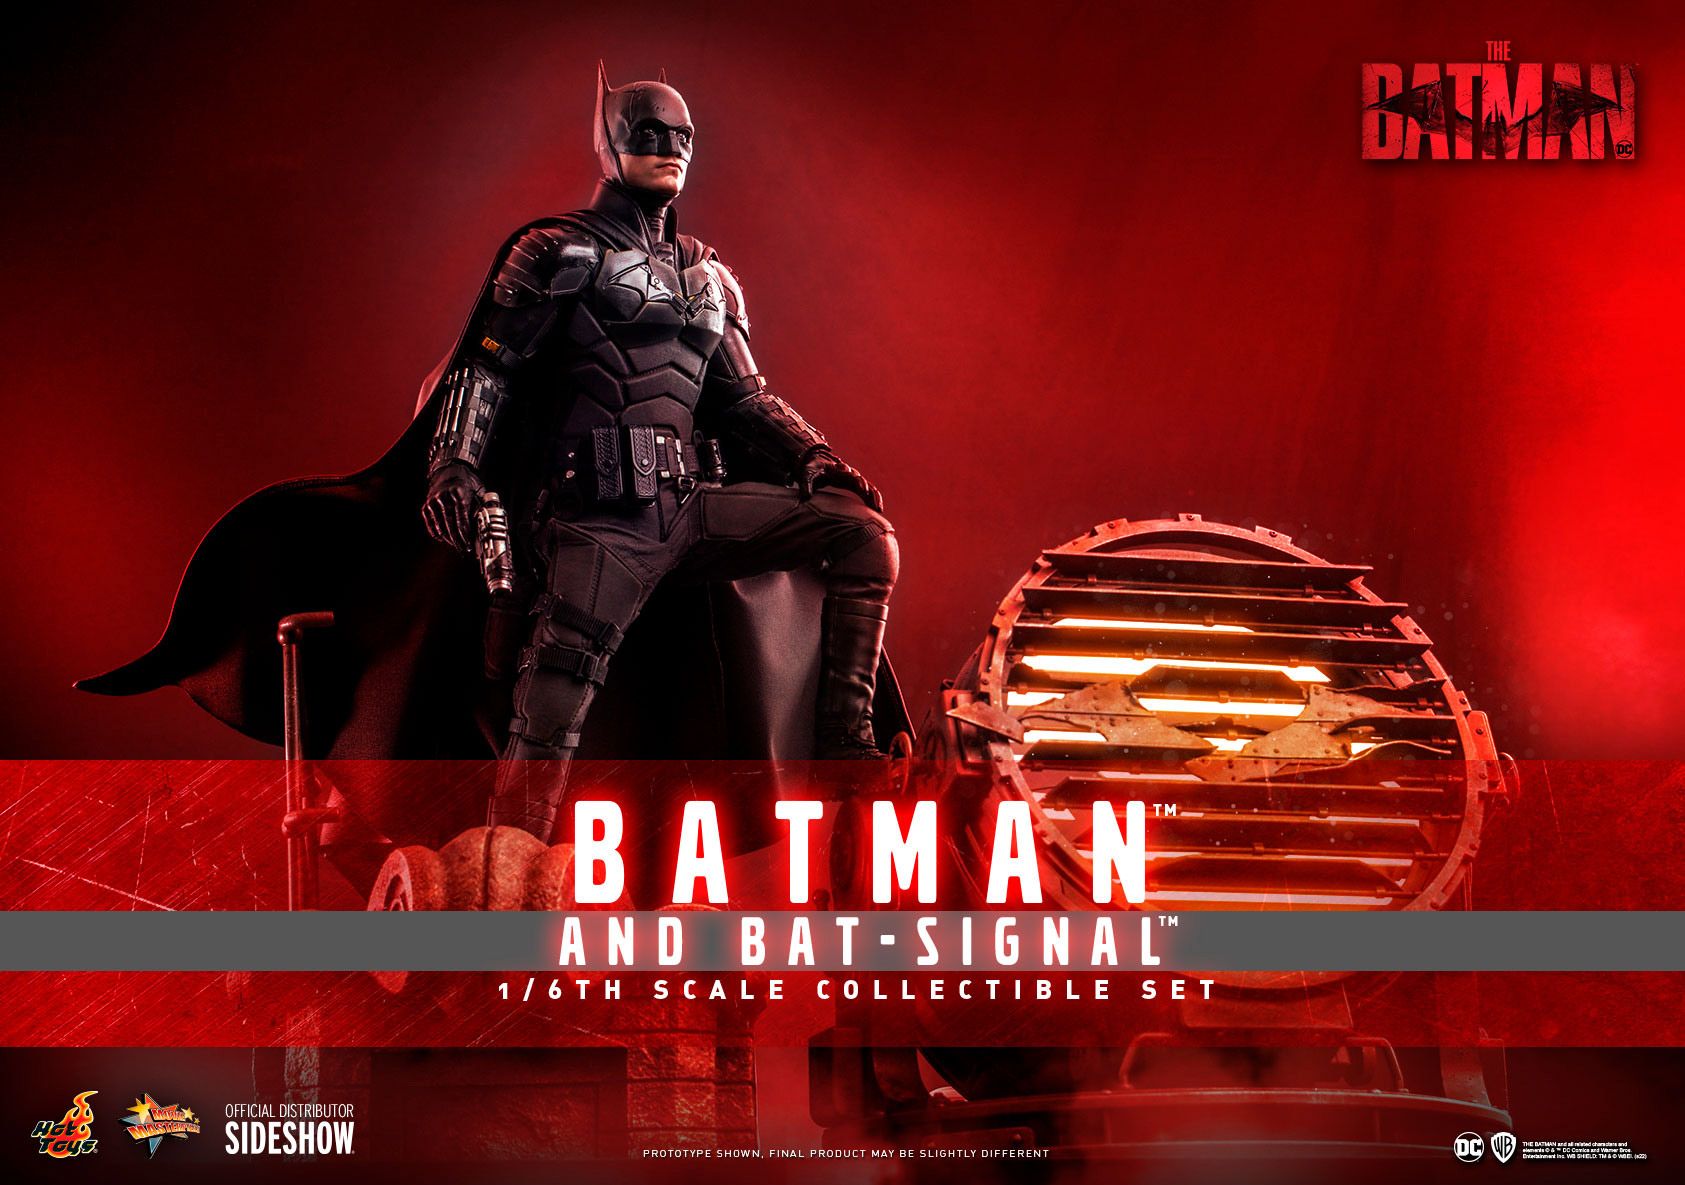 The Batman 2022 Hot Toys Deluxe Figure with Bat Signal